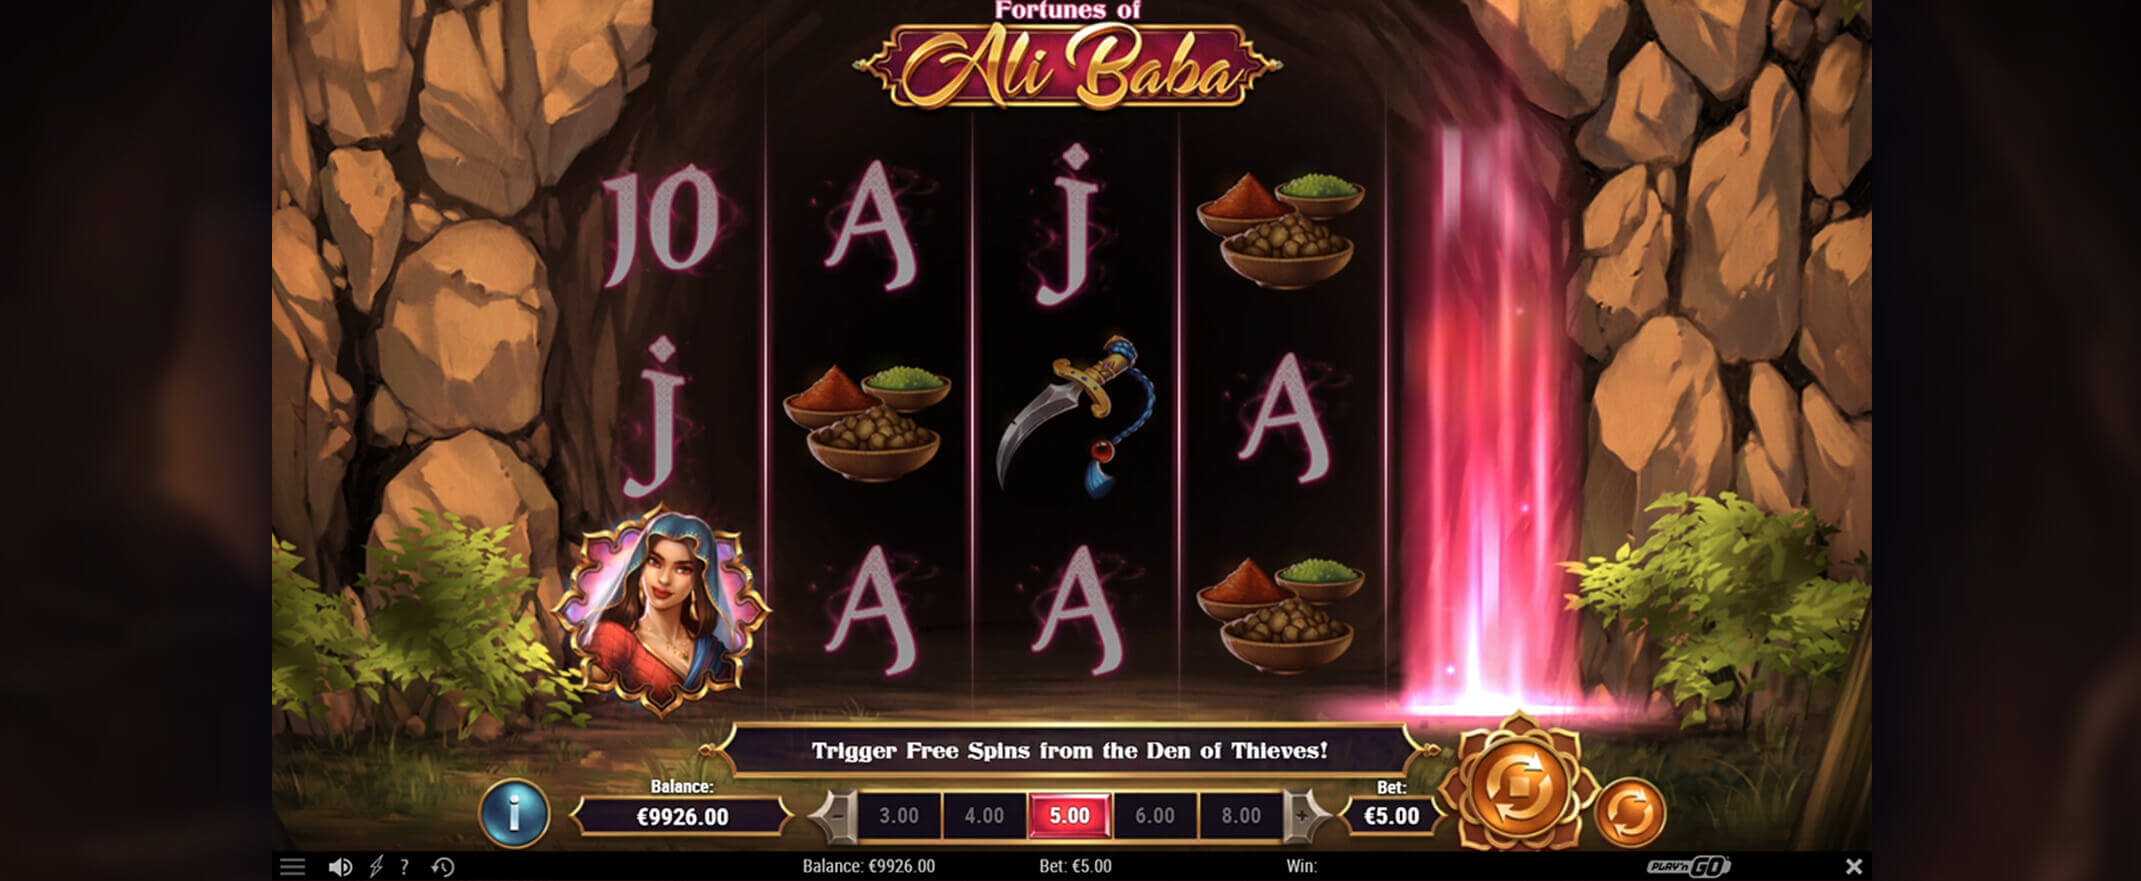 Fortunes of Ali Baba Win - Emirates Casino Slot Review